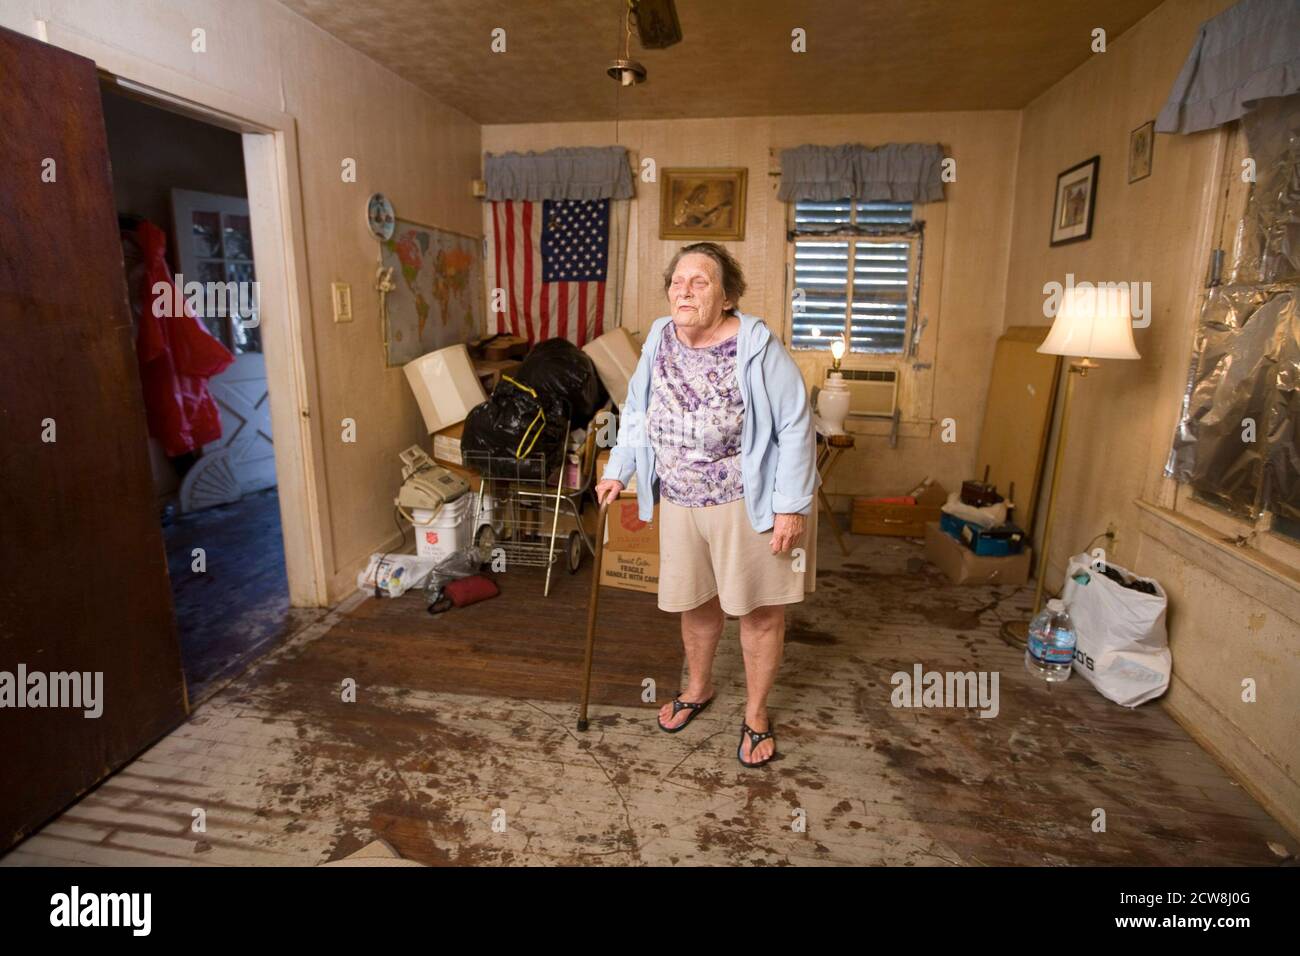 Galveston, TX September 27, 2008:  More than two weeks after Hurrican Ike ravaged Galveston Island and east Texas, some Galveston residents are still living in squalid conditions. Patricia Aguilar, 75, of 1911 Avenue N on the east side, has been sleeping on a damp and moldy mattress until volunteers from a church group came by to clear her house of rotten food and furnishings. ©Bob Daemmrich Stock Photo